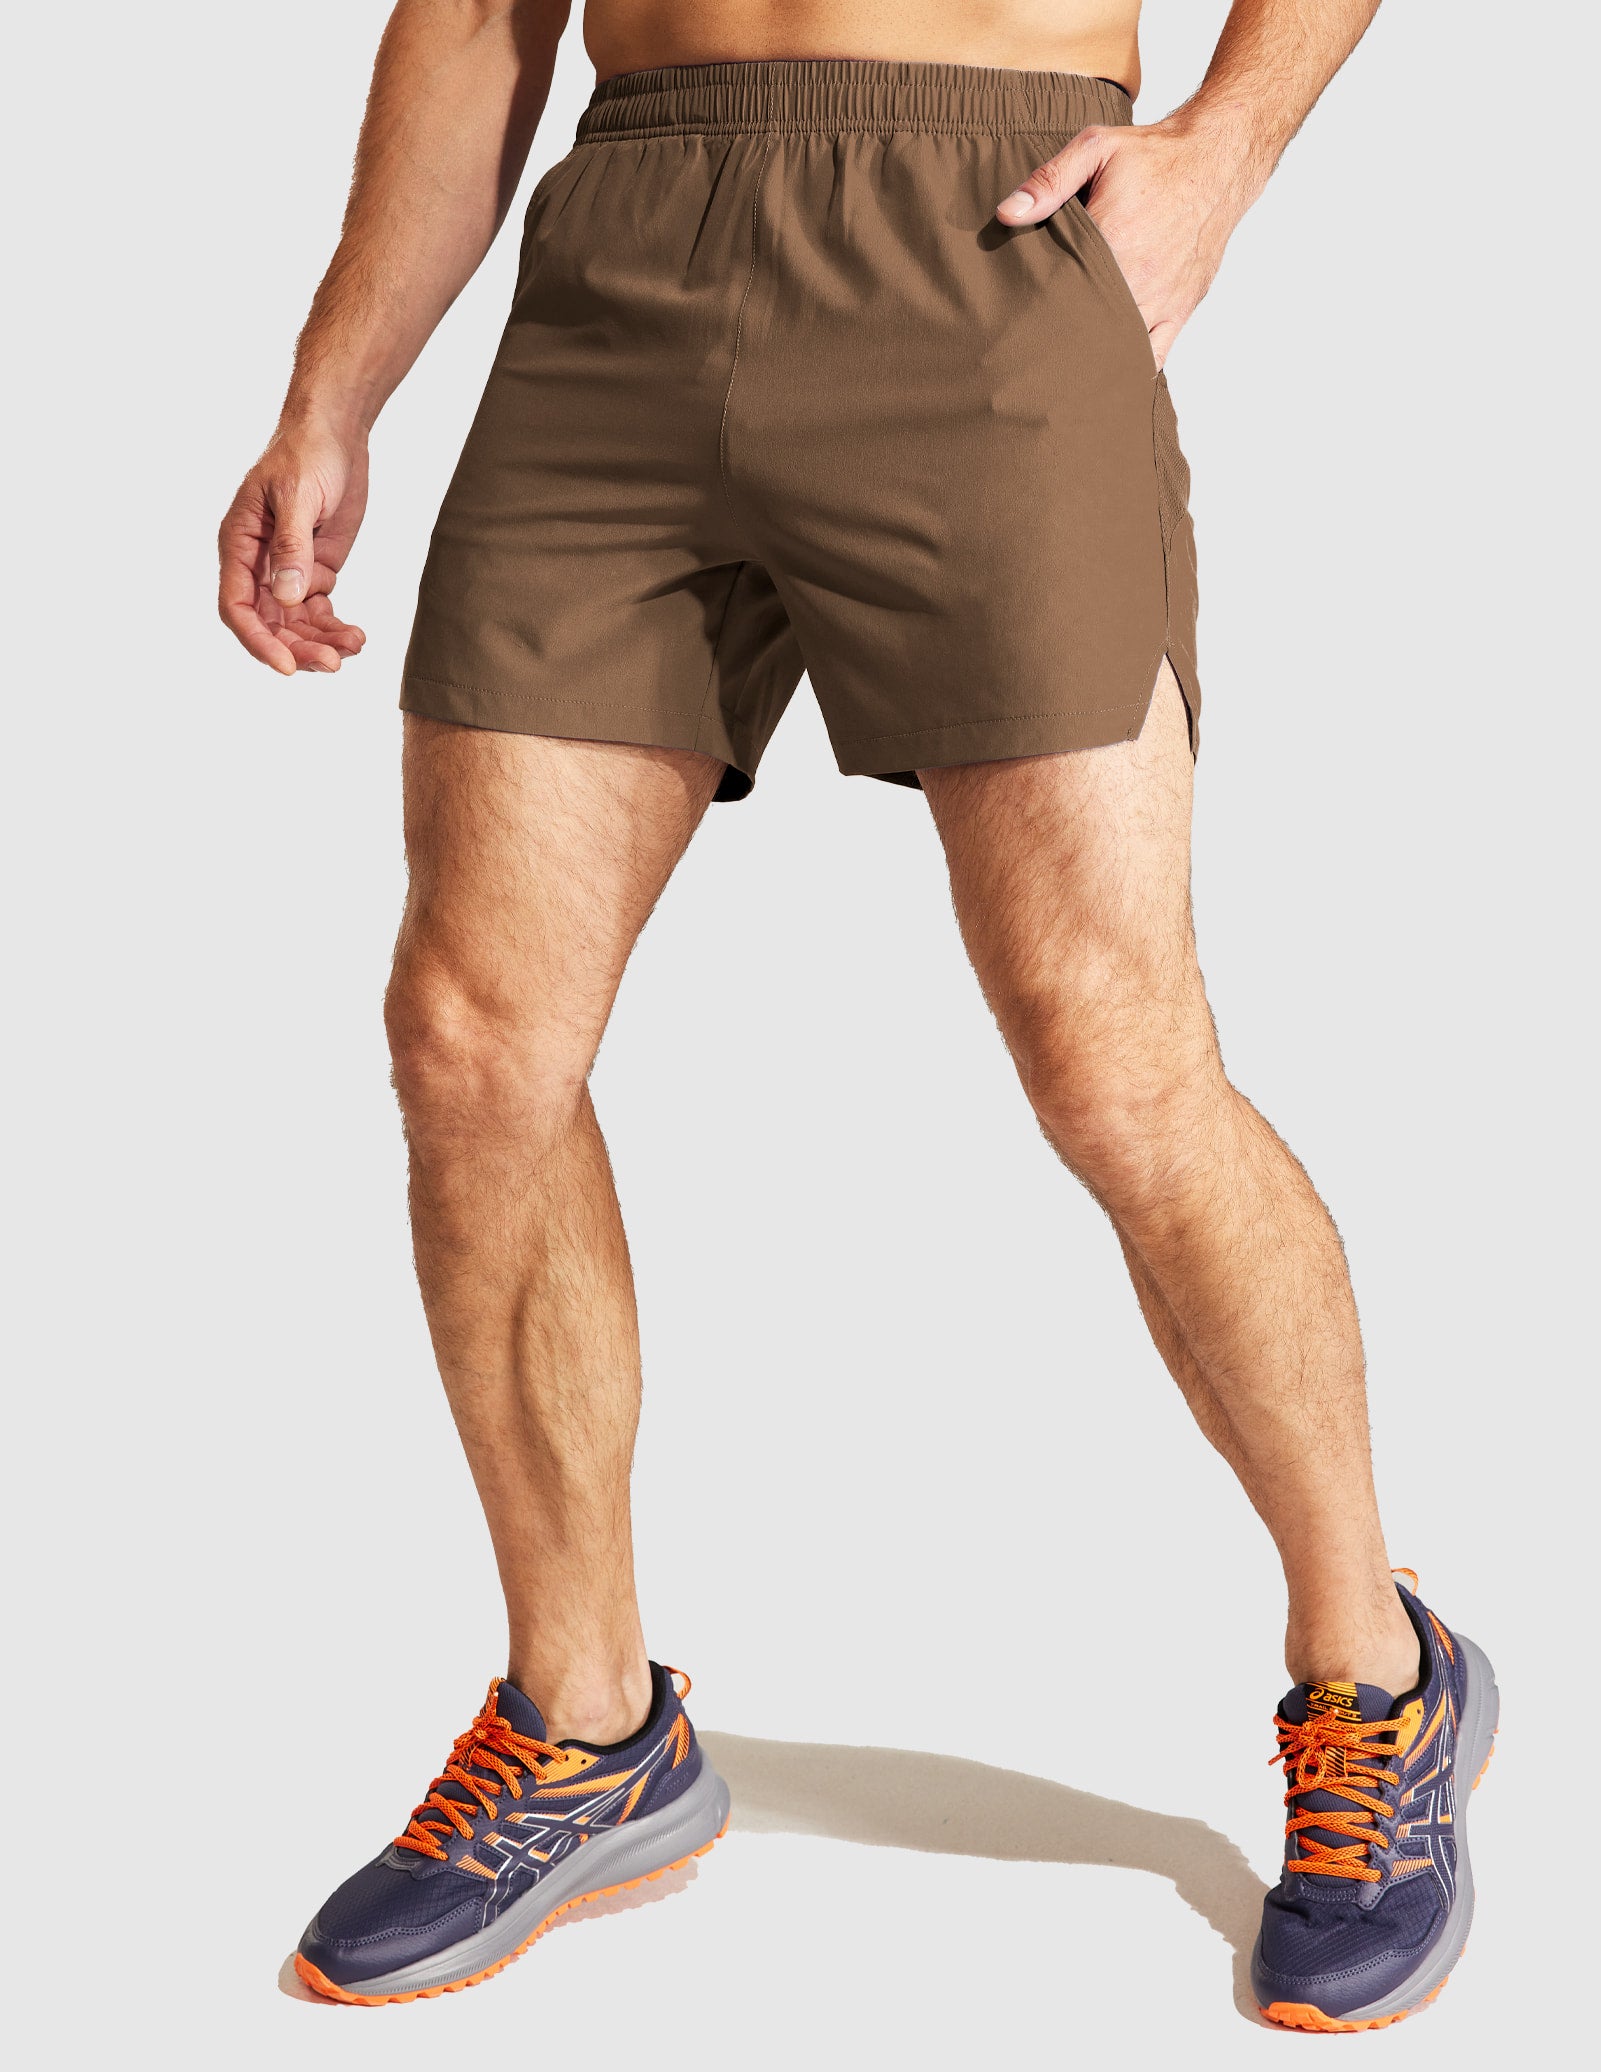 Men's Workout Shorts 5 Inches Running Shorts with Pockets